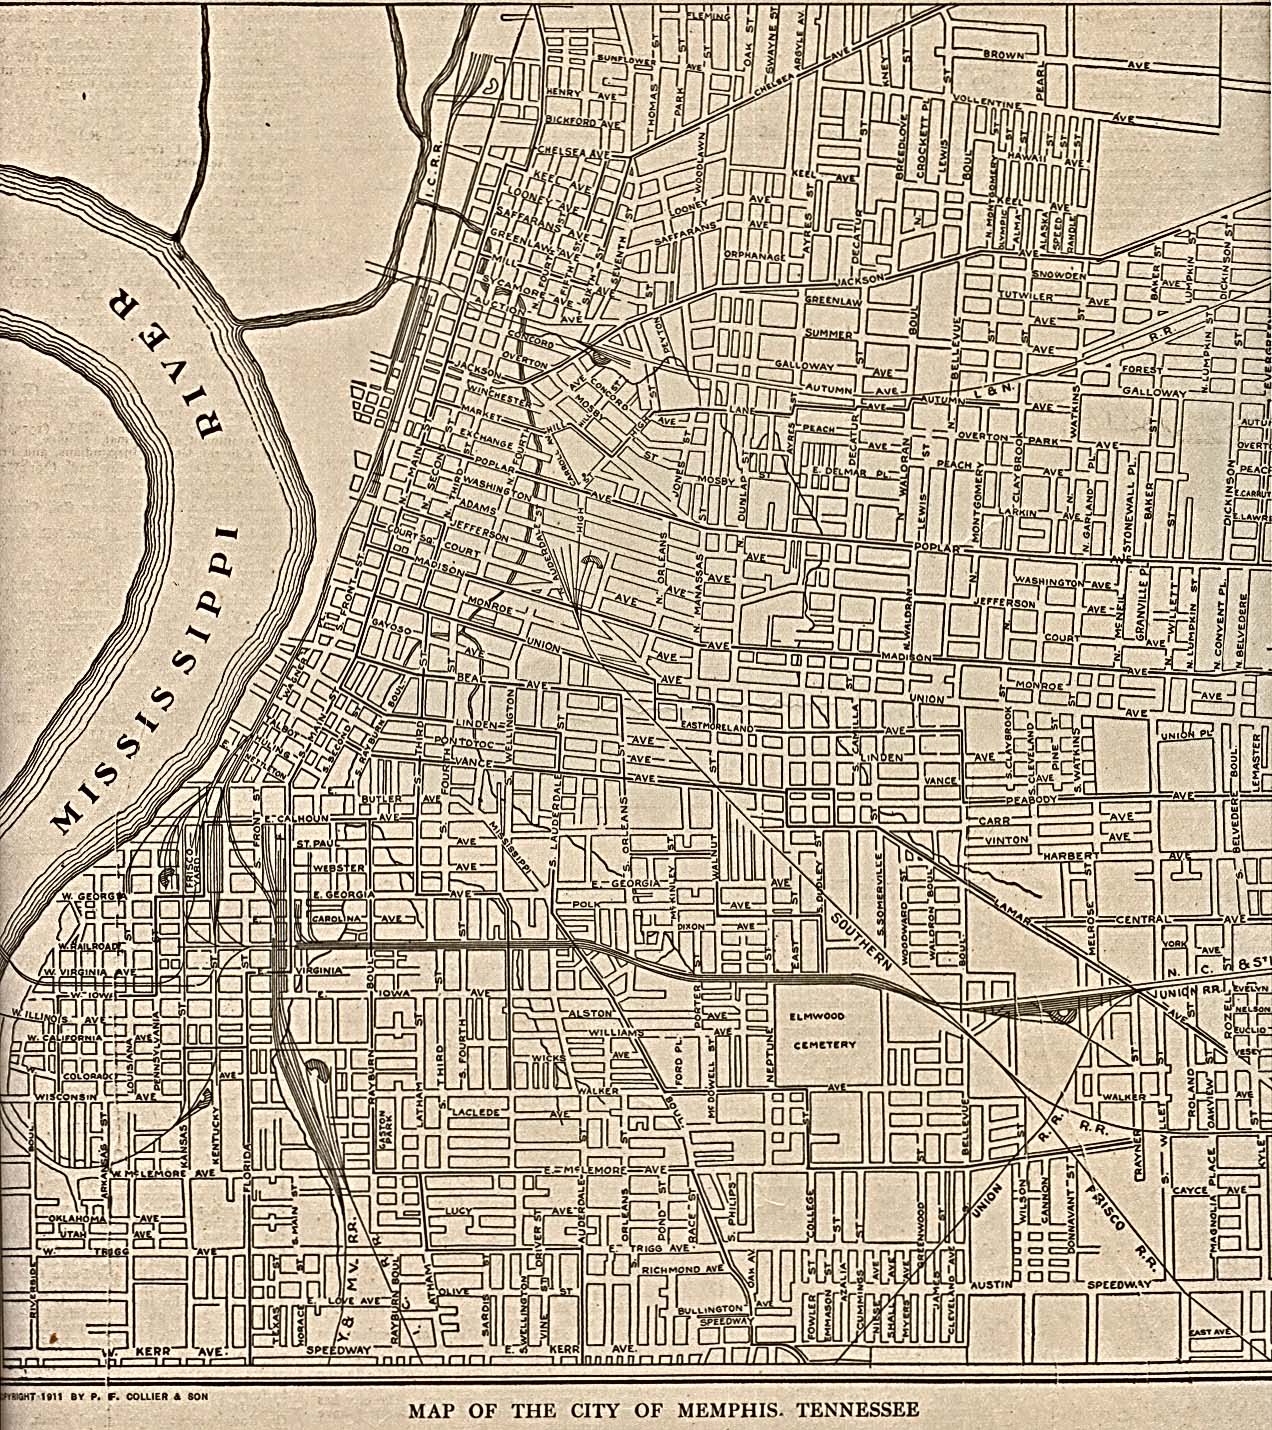 Historical Maps of U.S Cities. Memphis Tennessee 1911 The New Encyclopedic Atlas and Gazetteer of the World. New York: P.F. Collier & Son, 1917 (645K) 